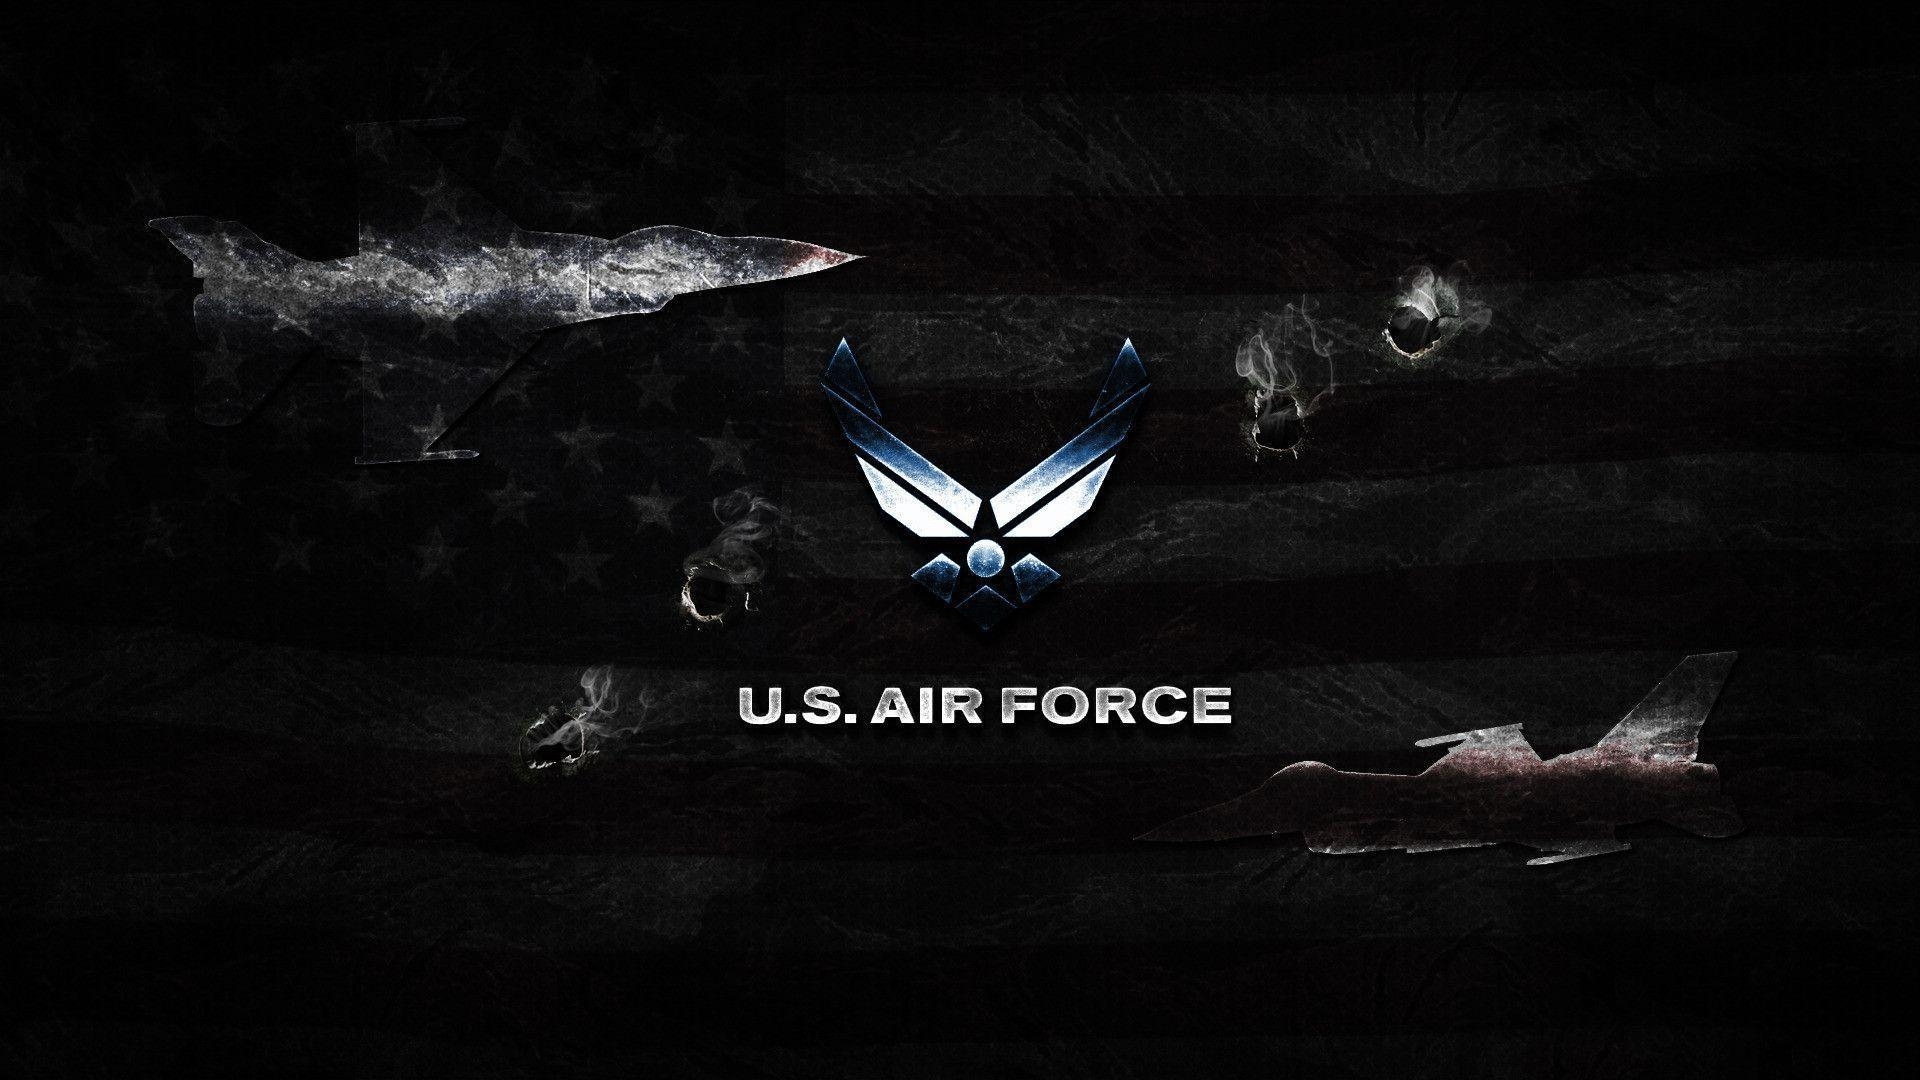 10 Best Air Force Desktop Backgrounds FULL HD 1920×1080 For PC Background